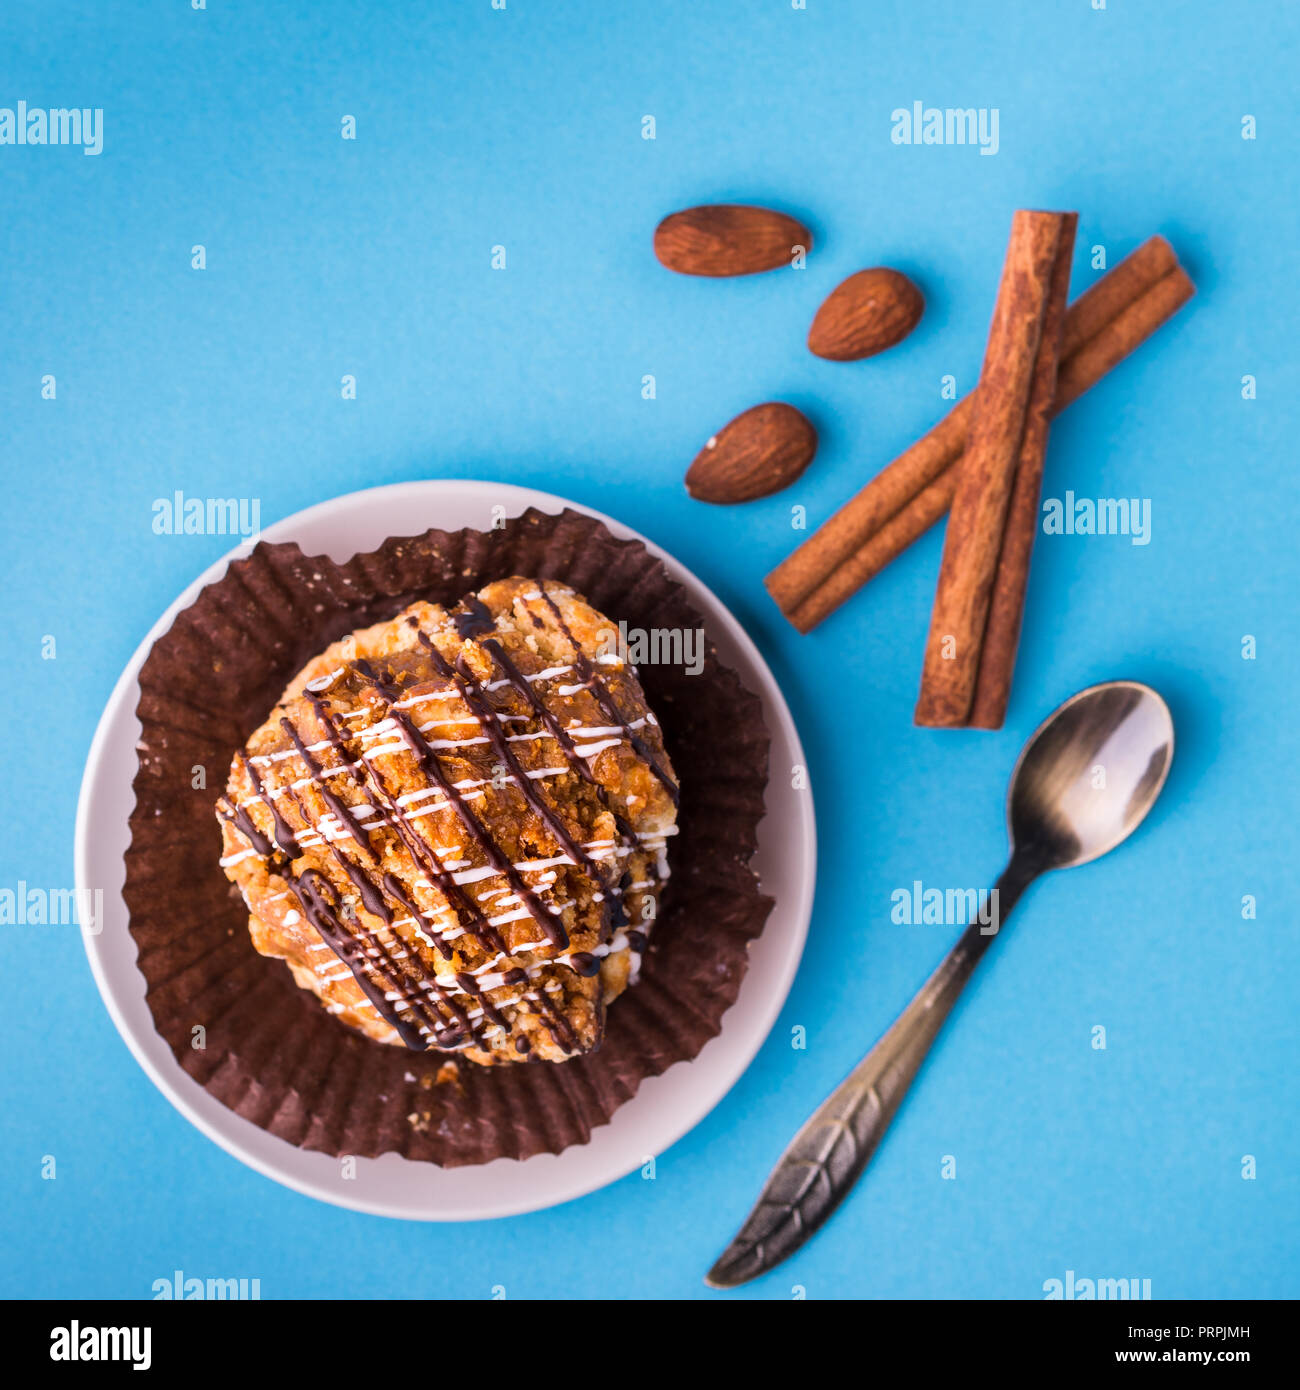 Delicious small cake dessert with caramel and chocolate. Close up view. Decorated with cinnamon sticks and almond nuts. Bright blue modern  background Stock Photo